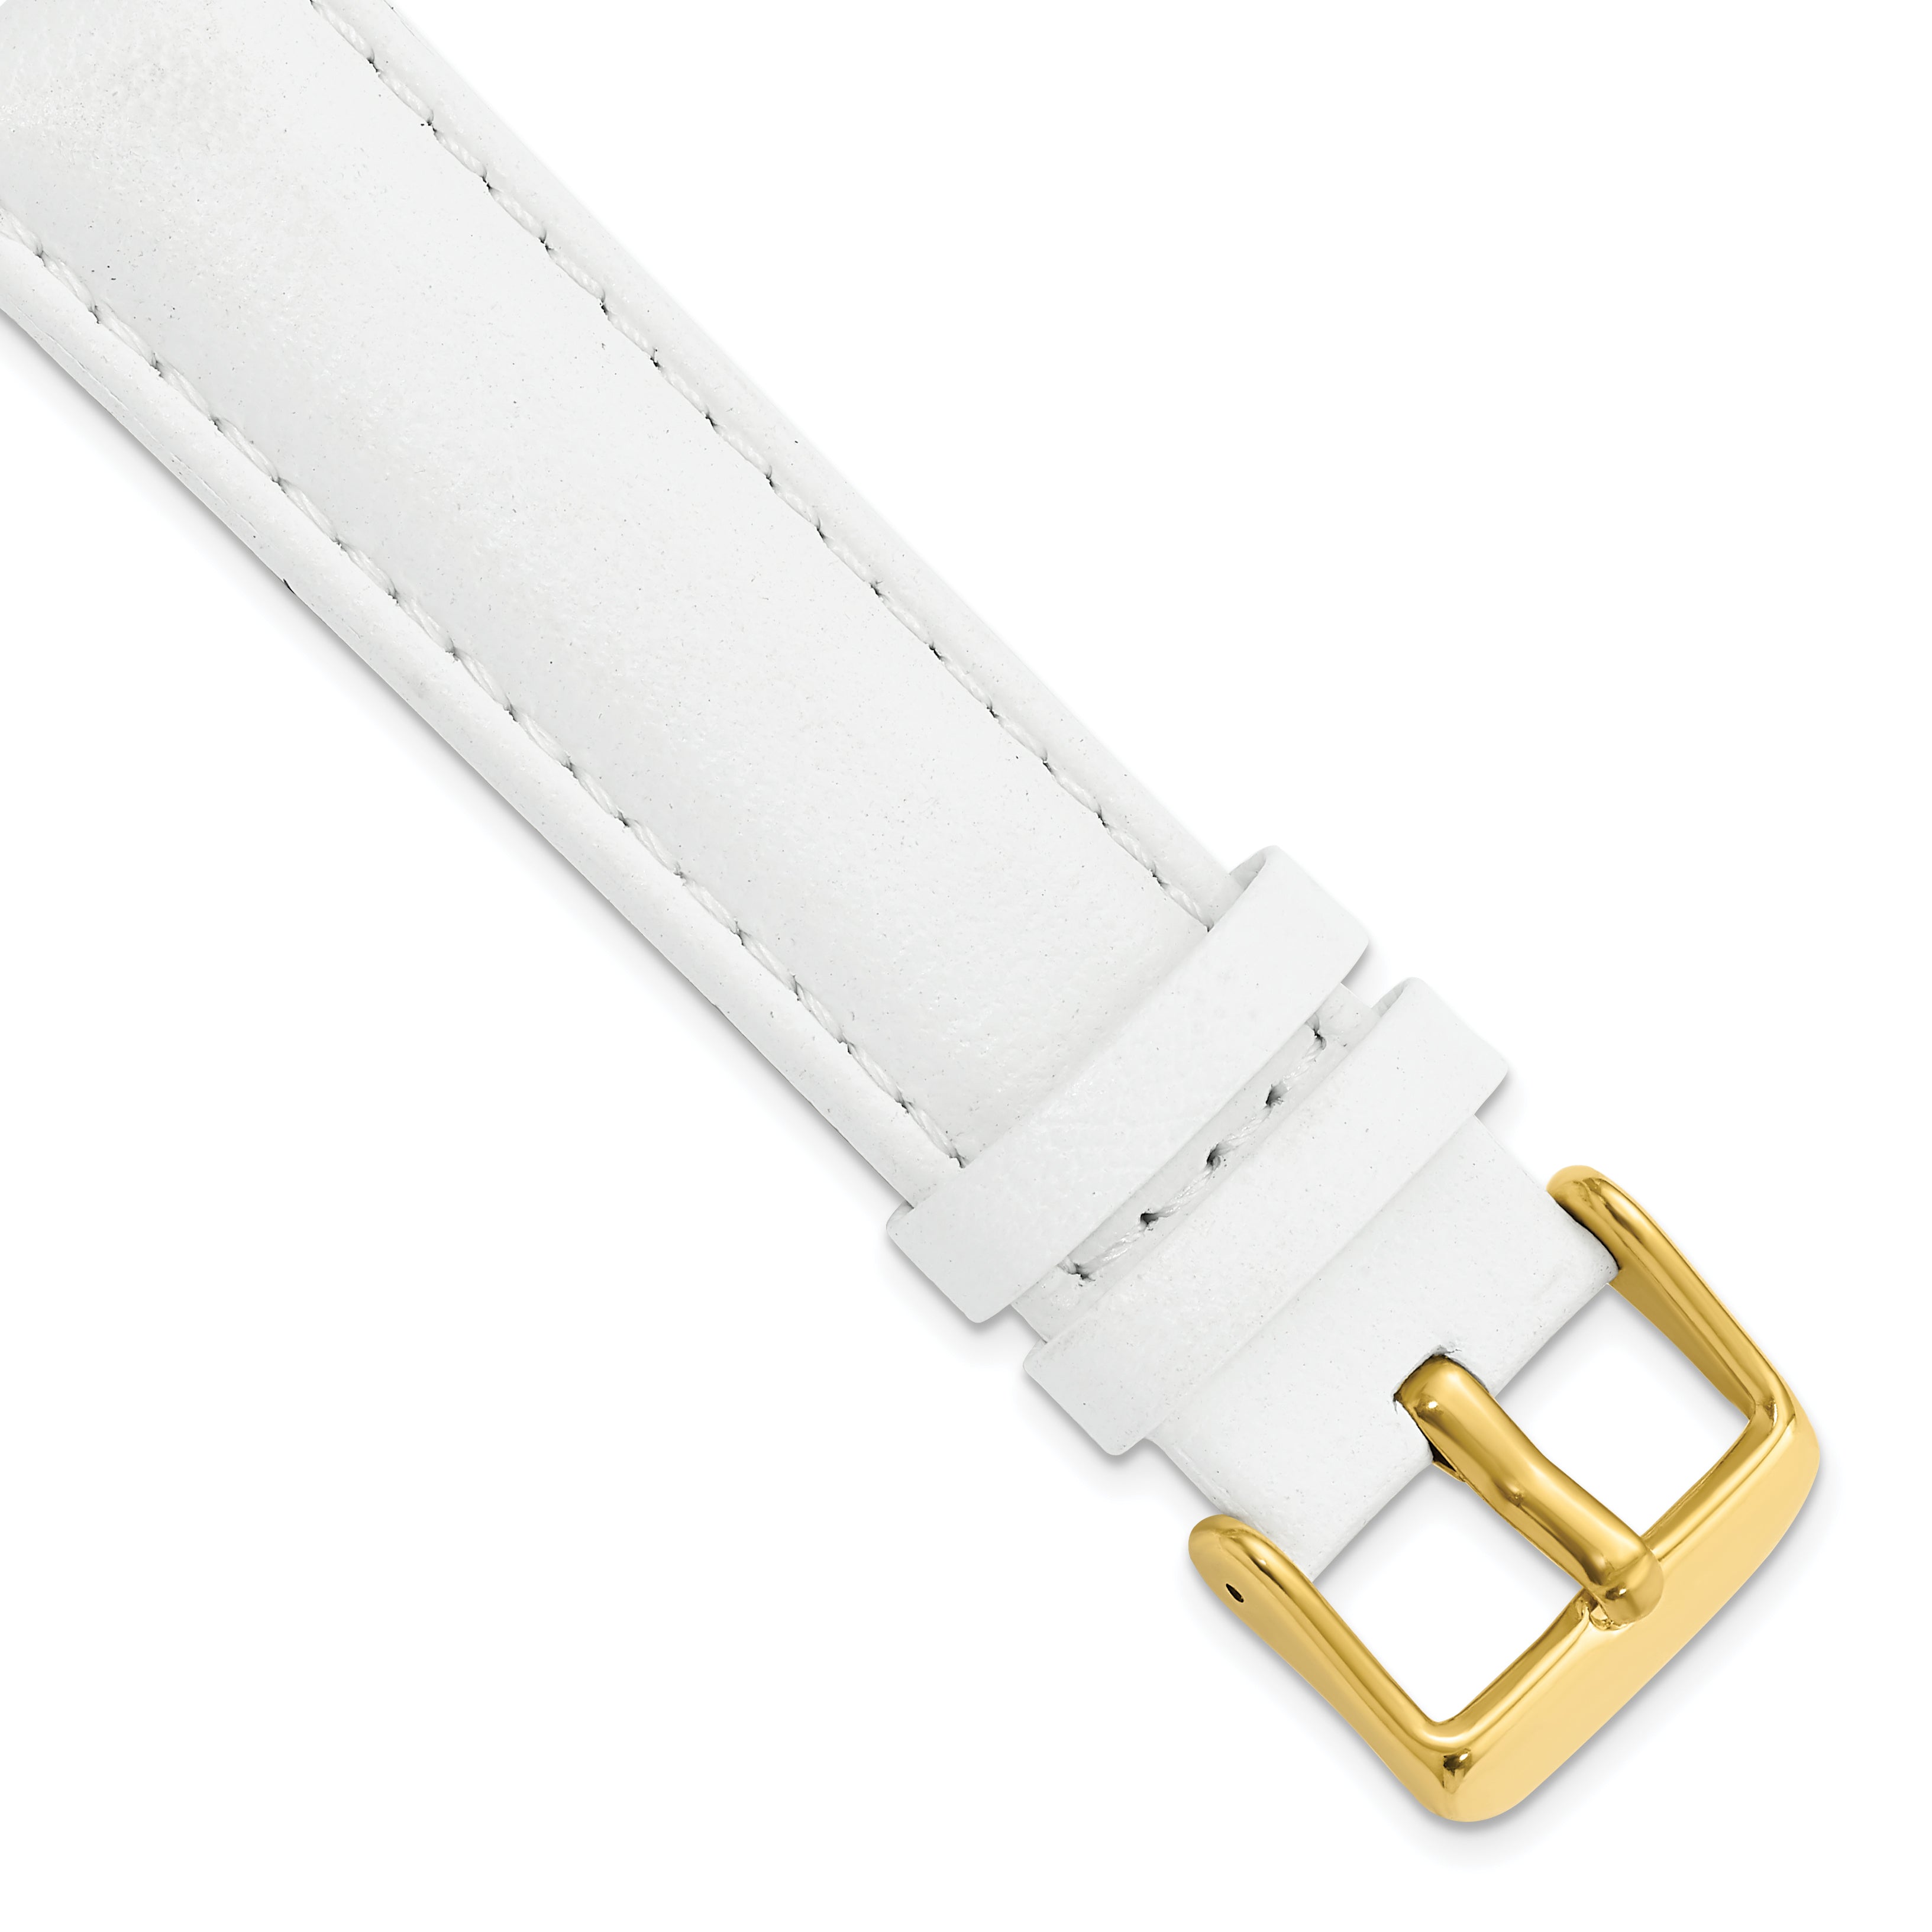 DeBeer 20mm White Glove Leather with Gold-tone Panerai Style Buckle 7.75 inch Watch Band